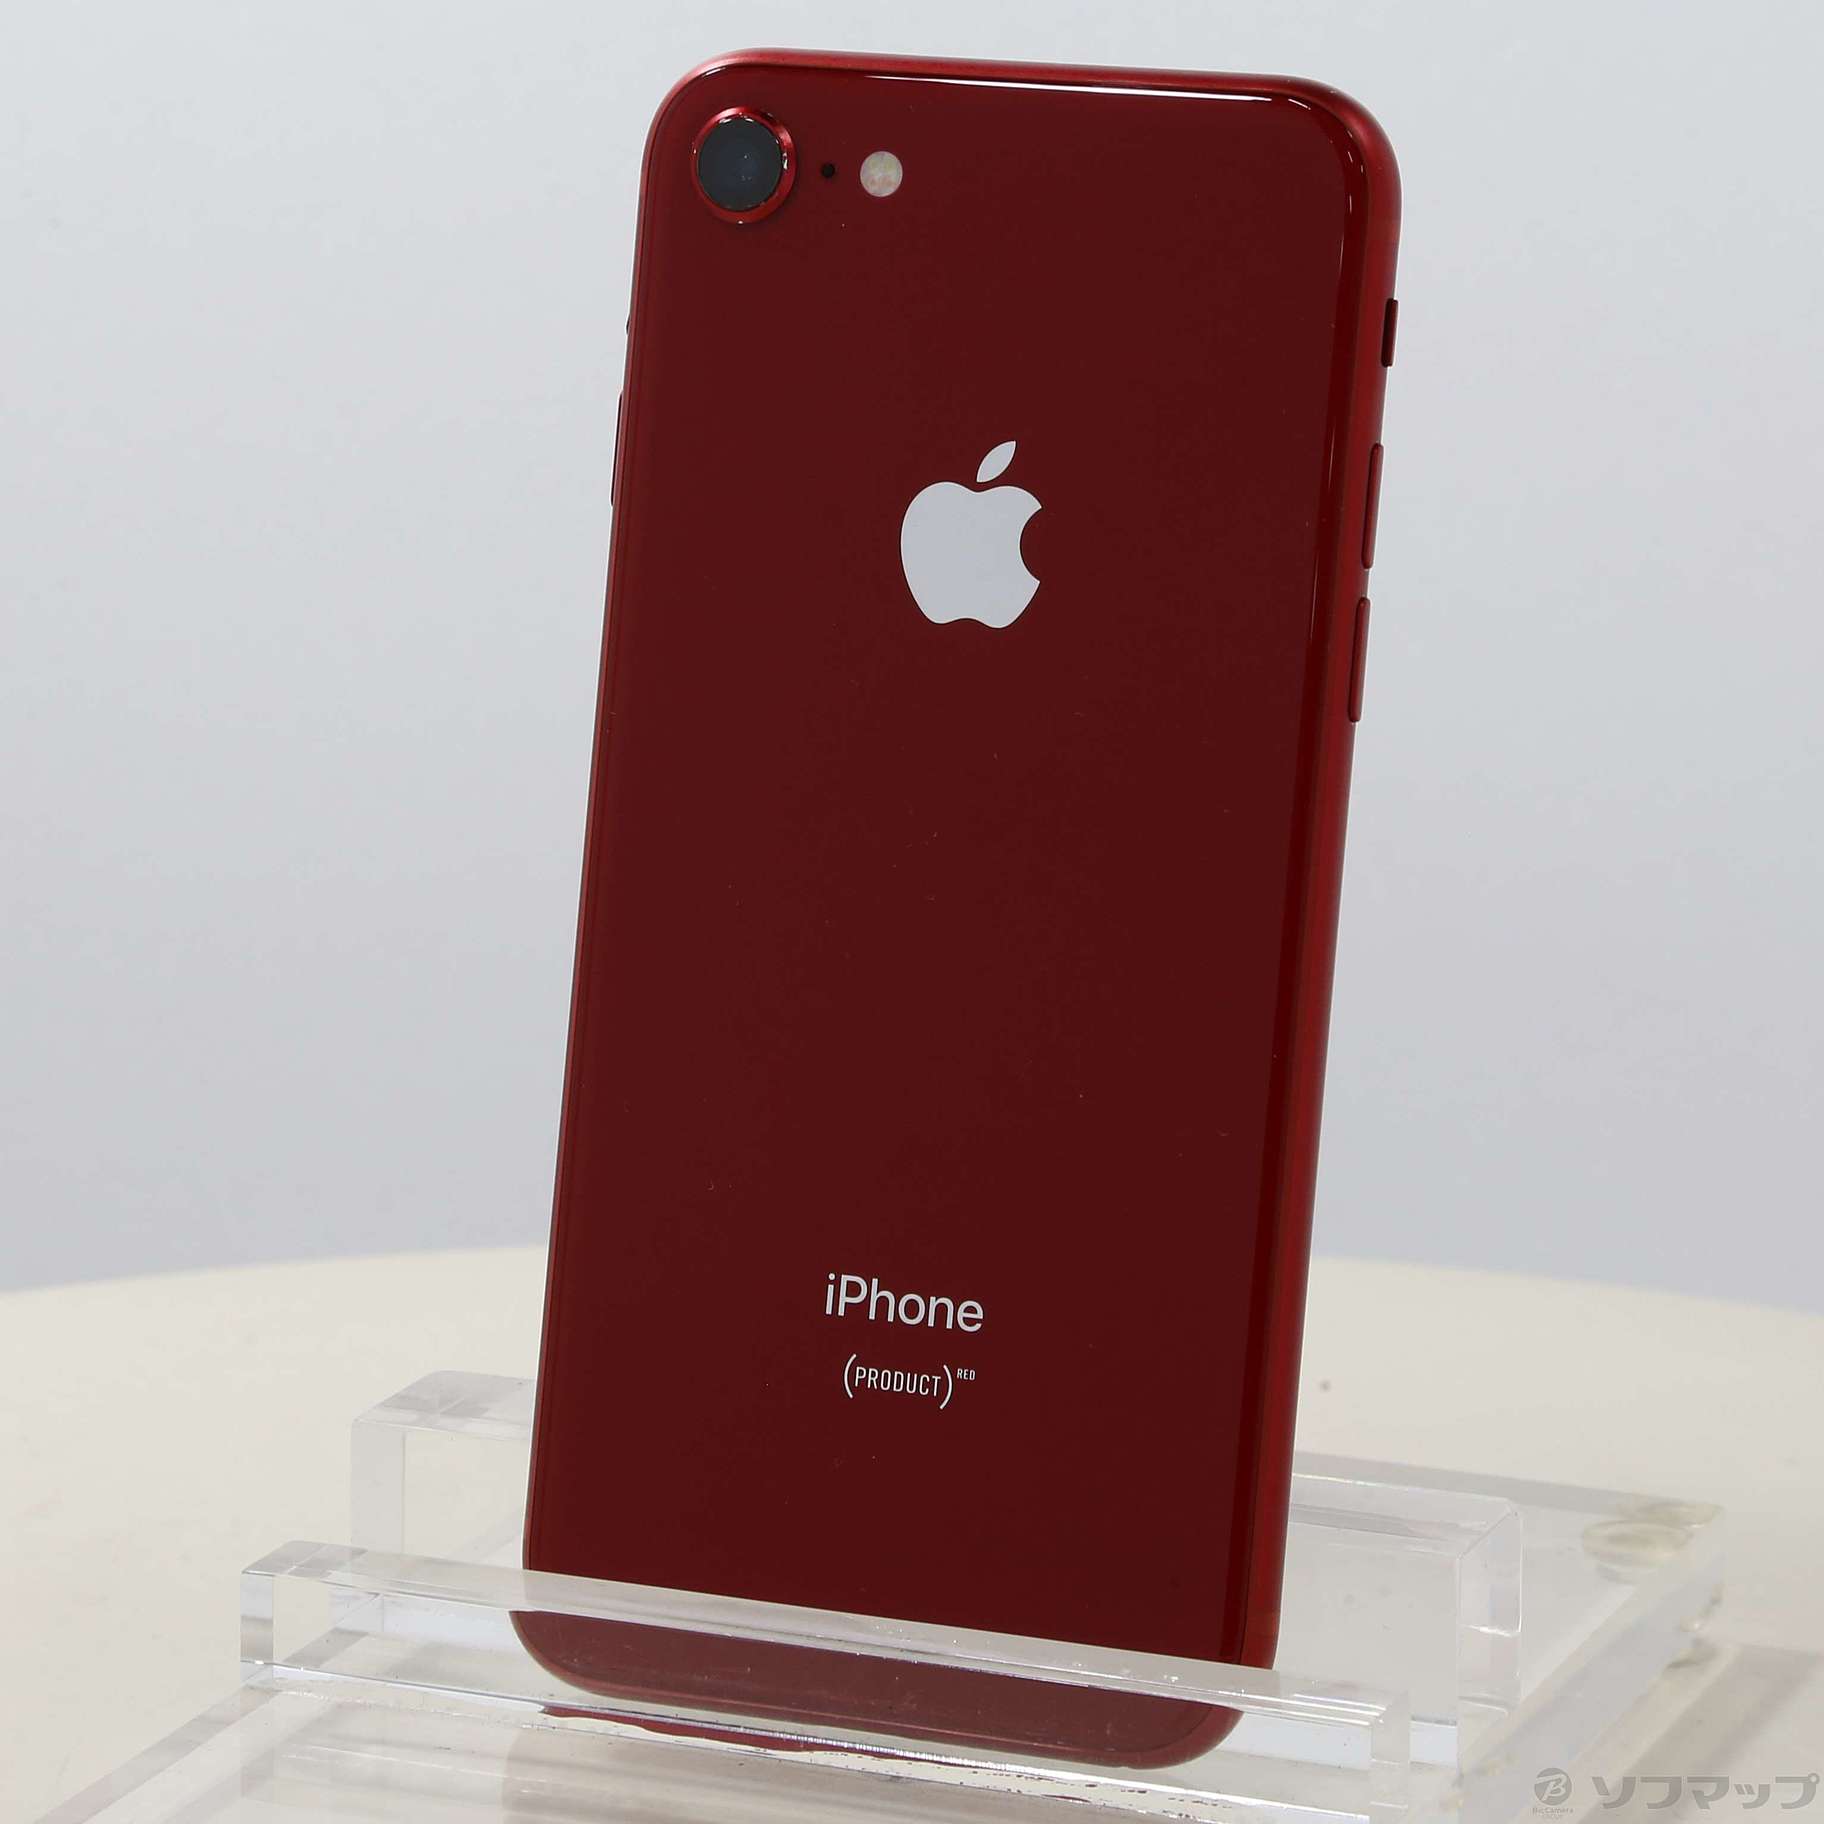 iPhone 8 256GB Red プロダクト レッド SIMフリー X62A - 2